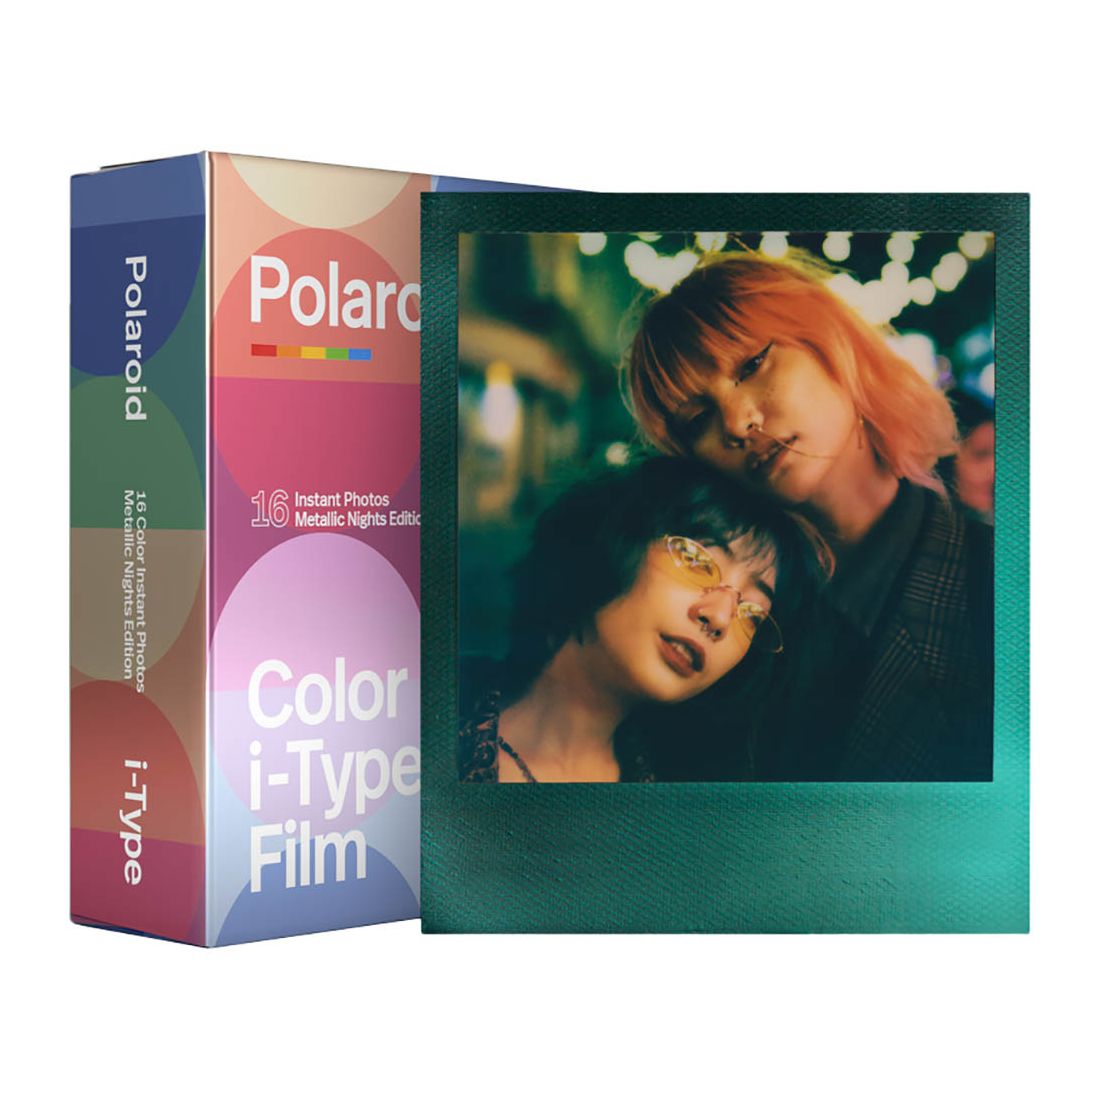 Polaroid Color Film for I Type Metallic Nights Double Pack